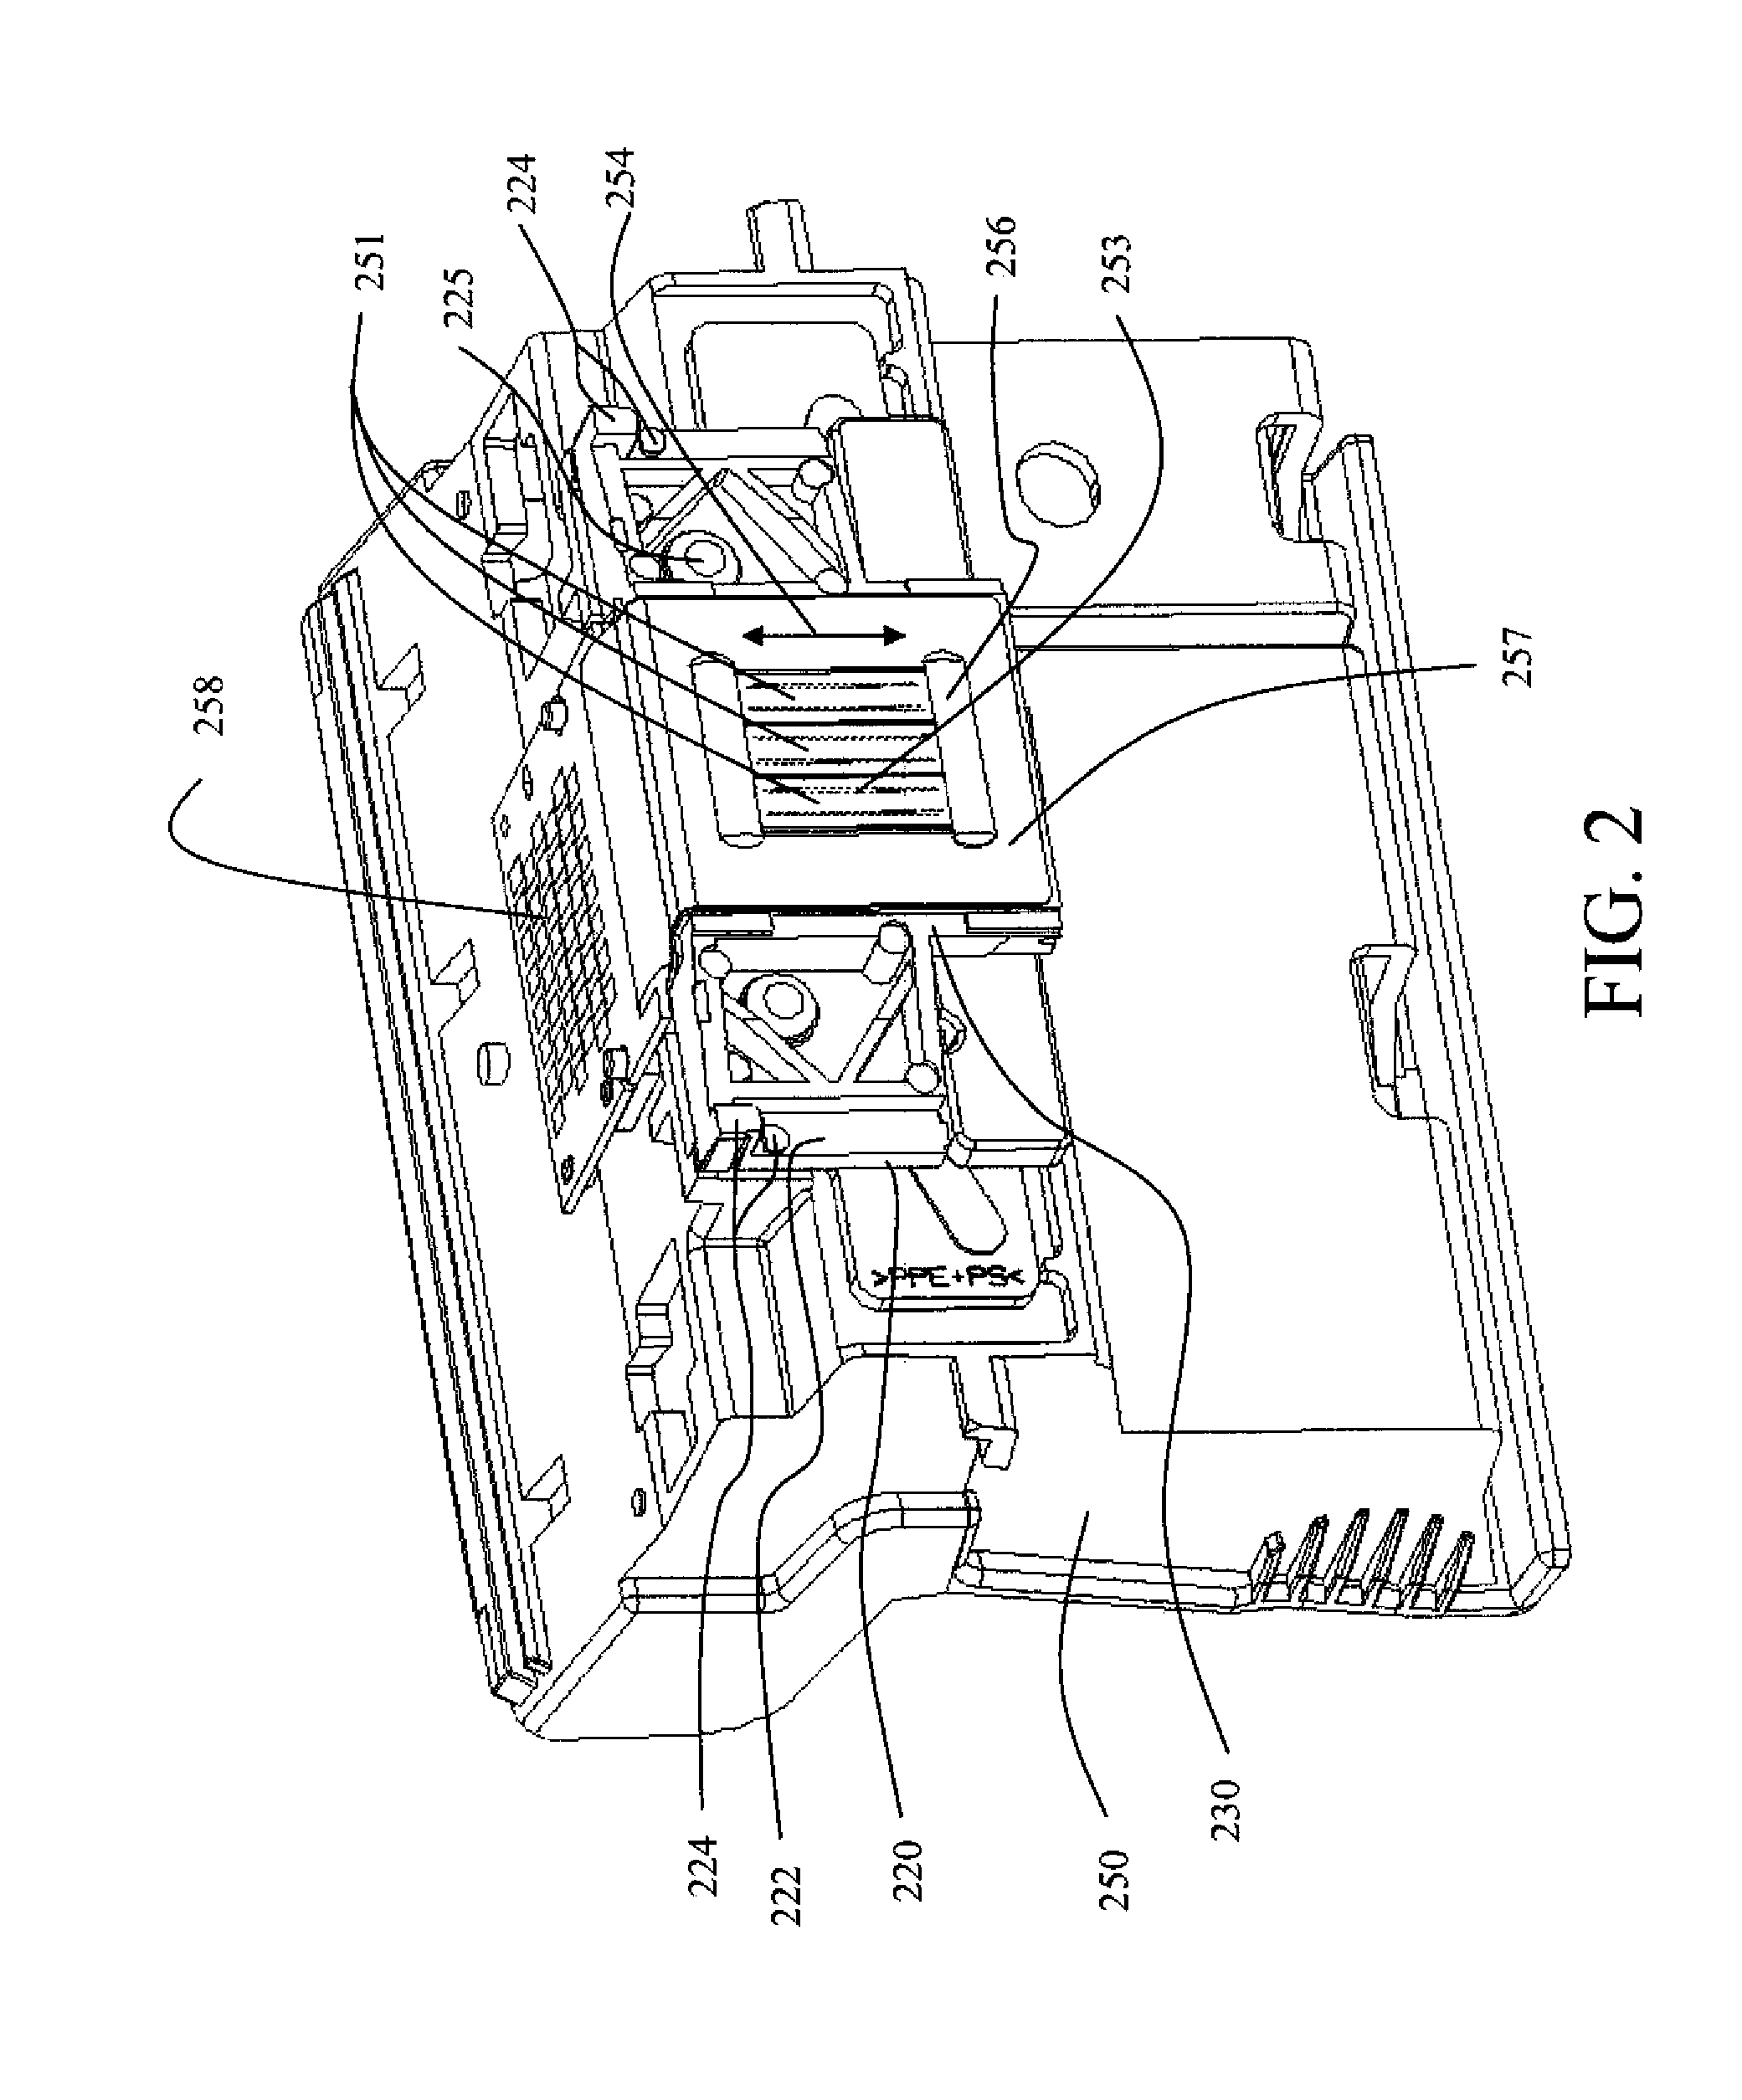 Fluid ejection assembly having a mounting substrate